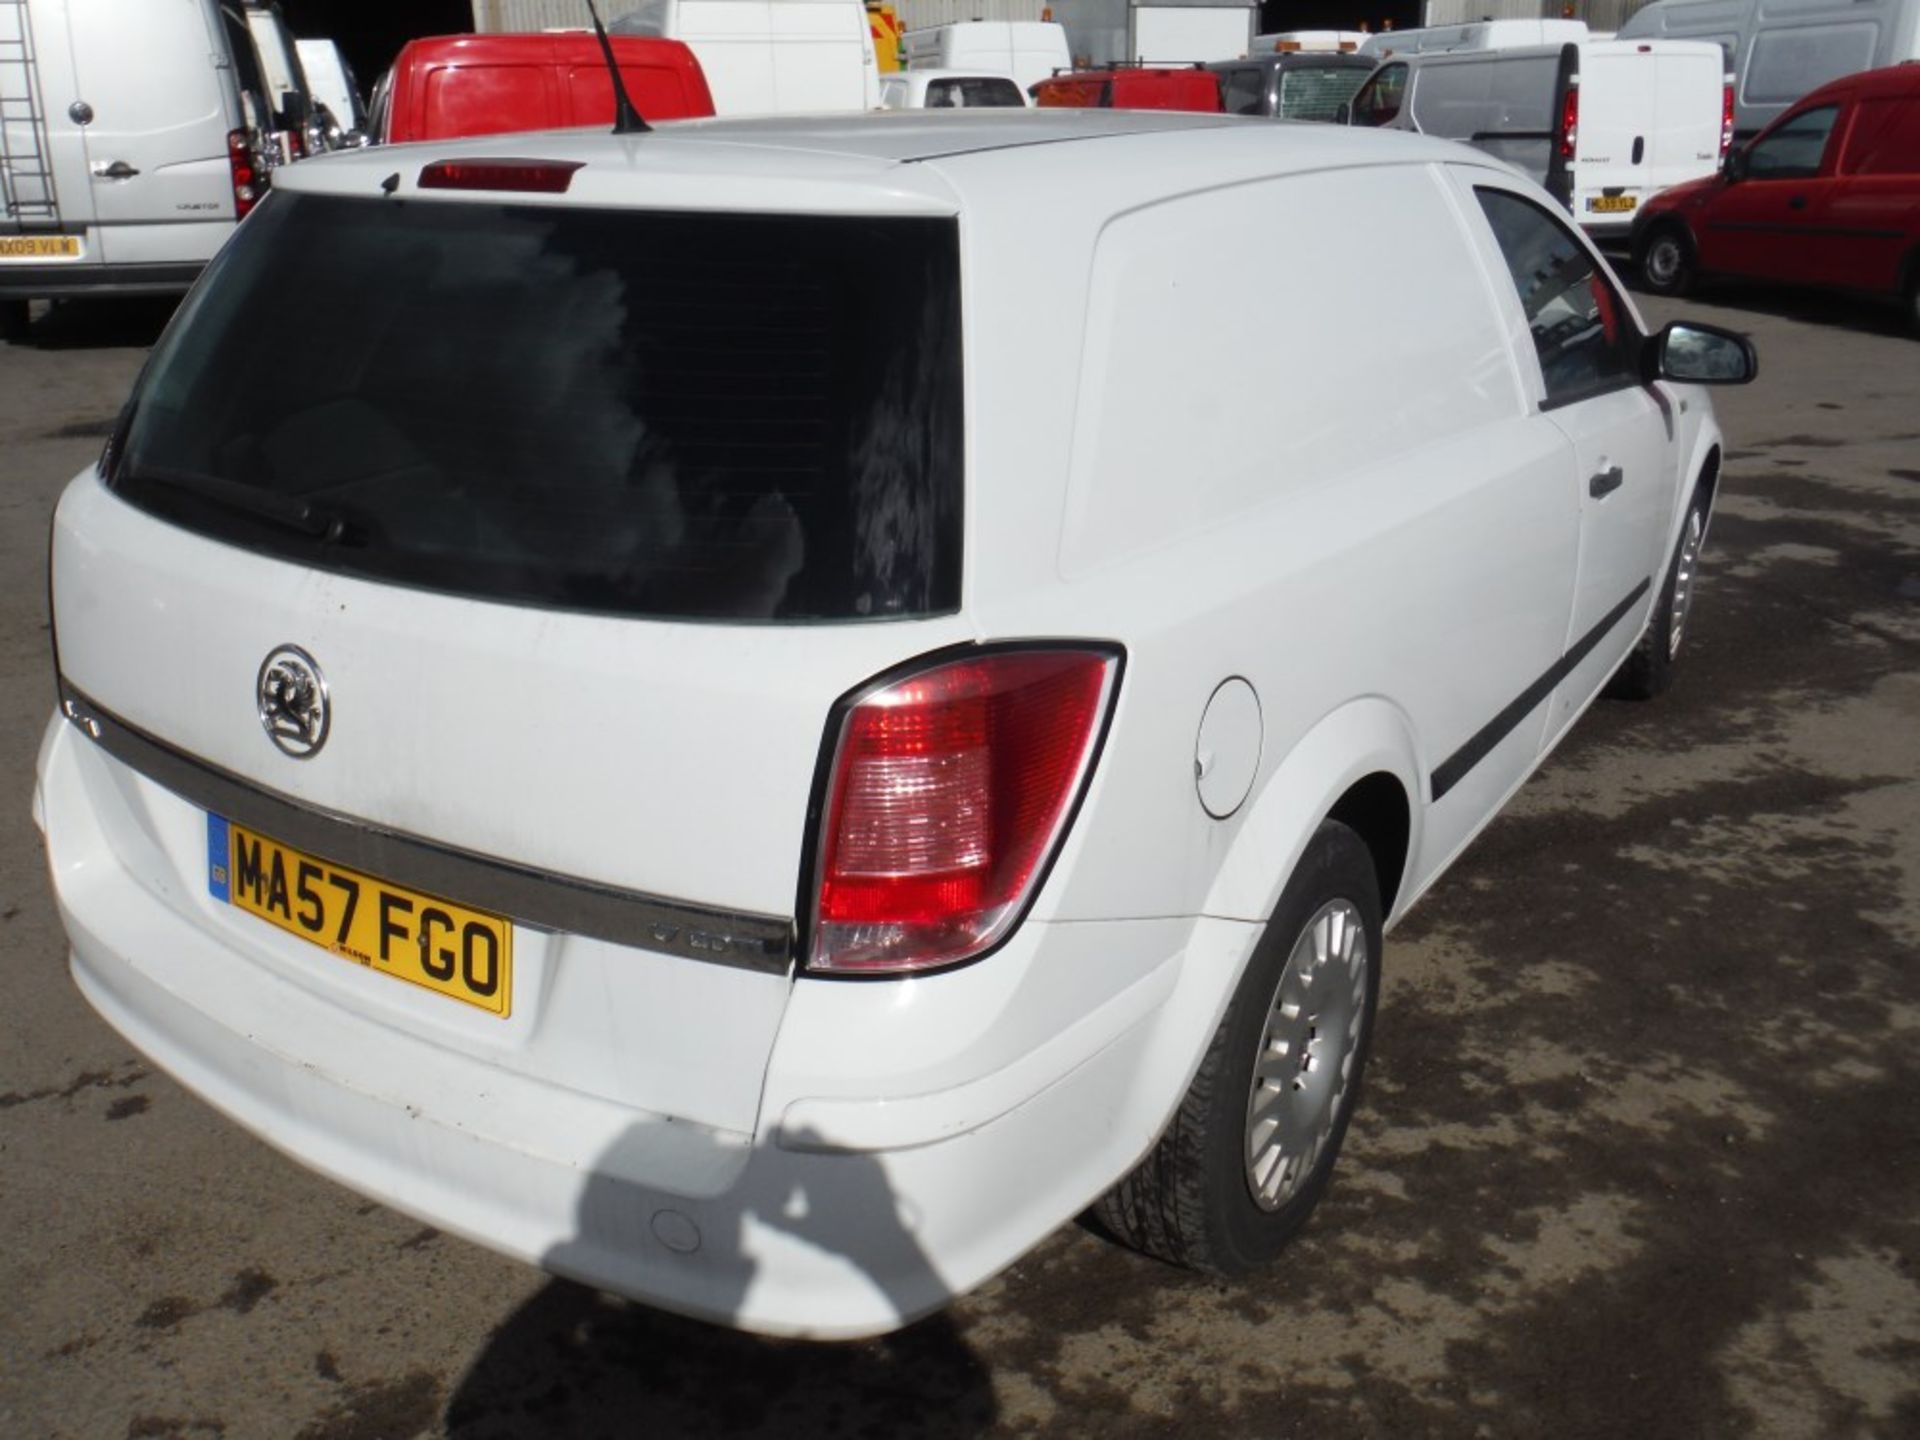 57 reg VAUXHALL ASTRA CLUB CDTI VAN, 1ST REG 10/07, TEST 06/15, 154410M, V5 HERE, 1 OWNER FROM - Image 4 of 5